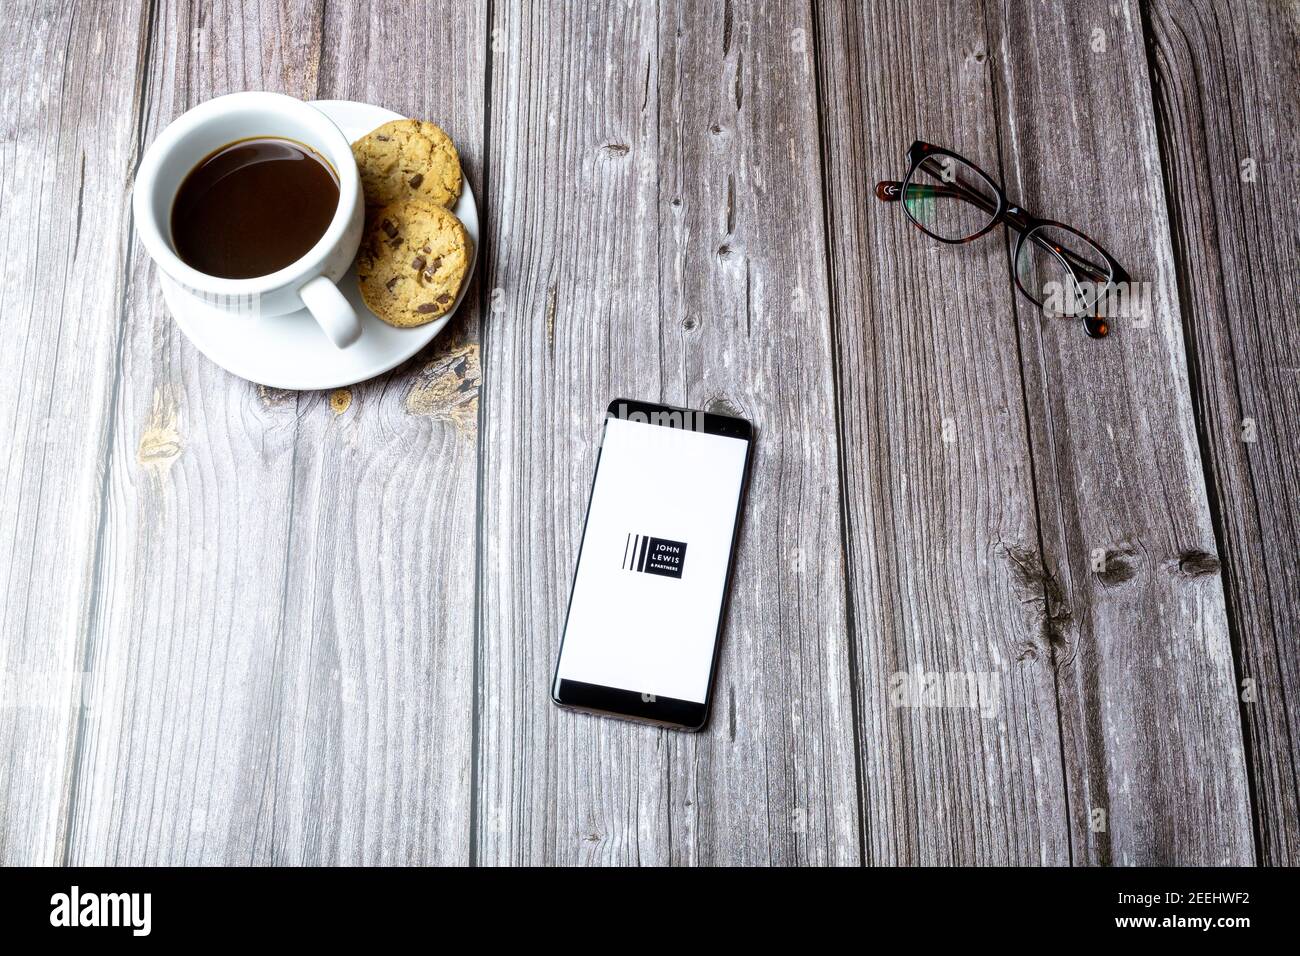 A mobile phone or cell phone laid on a wooden table with the John lewis and partners app open on screen Stock Photo